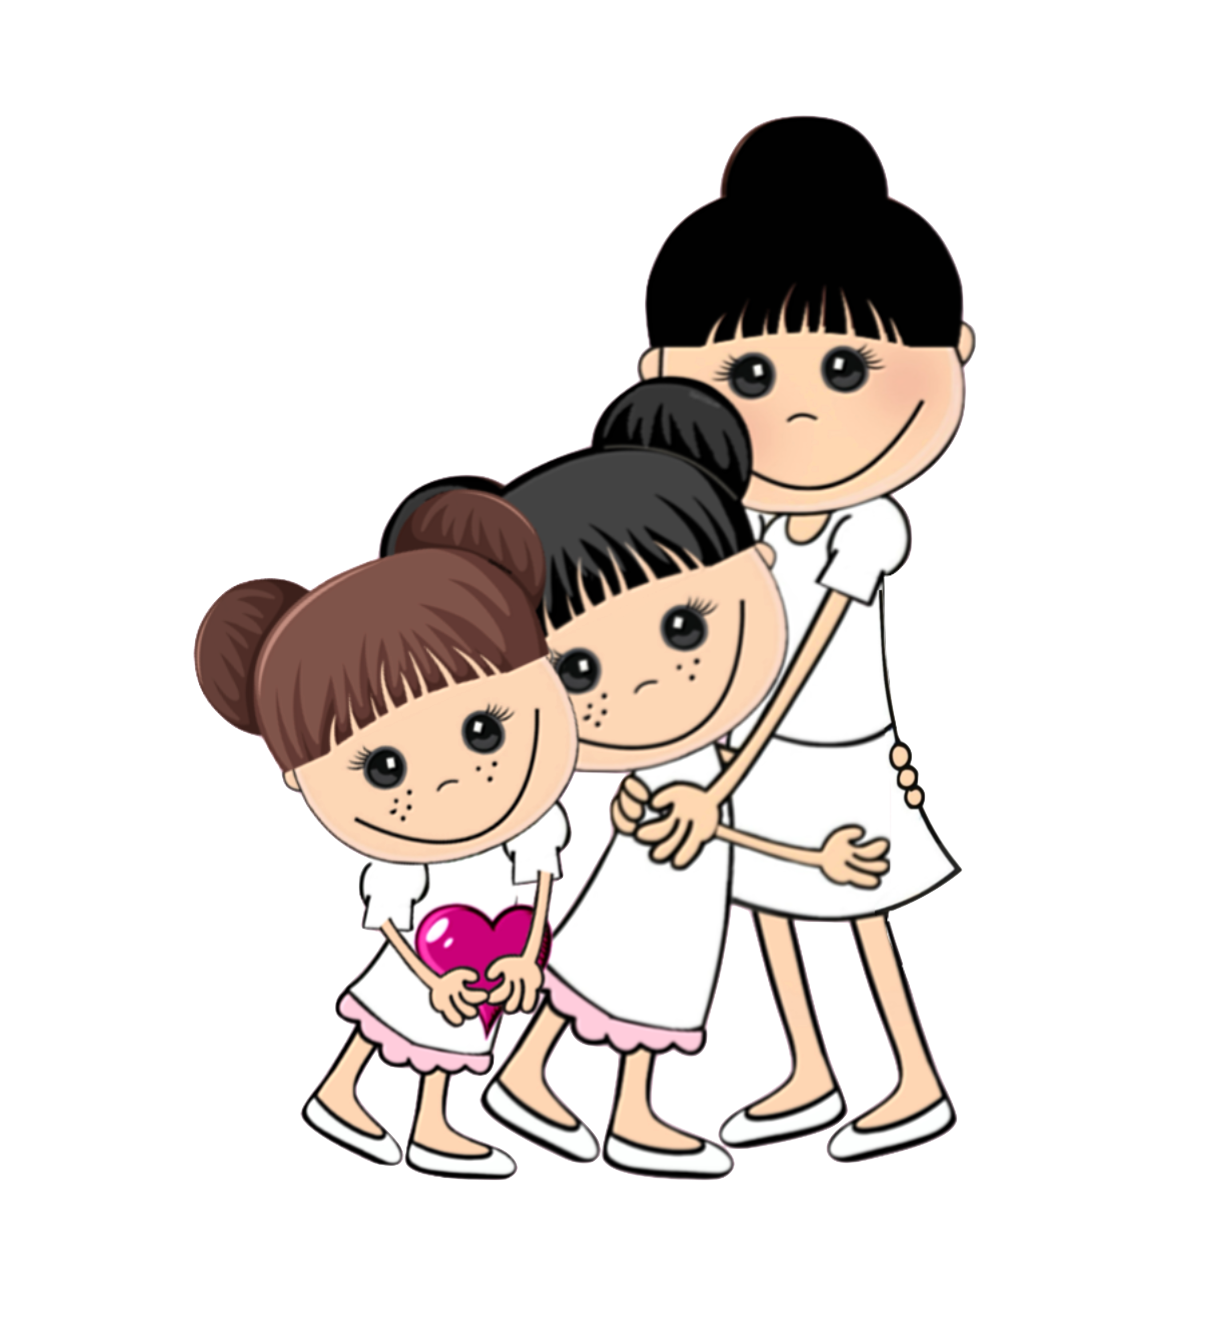 Mommy & Me Series - Black hair Mommy & Daughters black & brown hair. My adorable Mommy & daughters - Transparent back